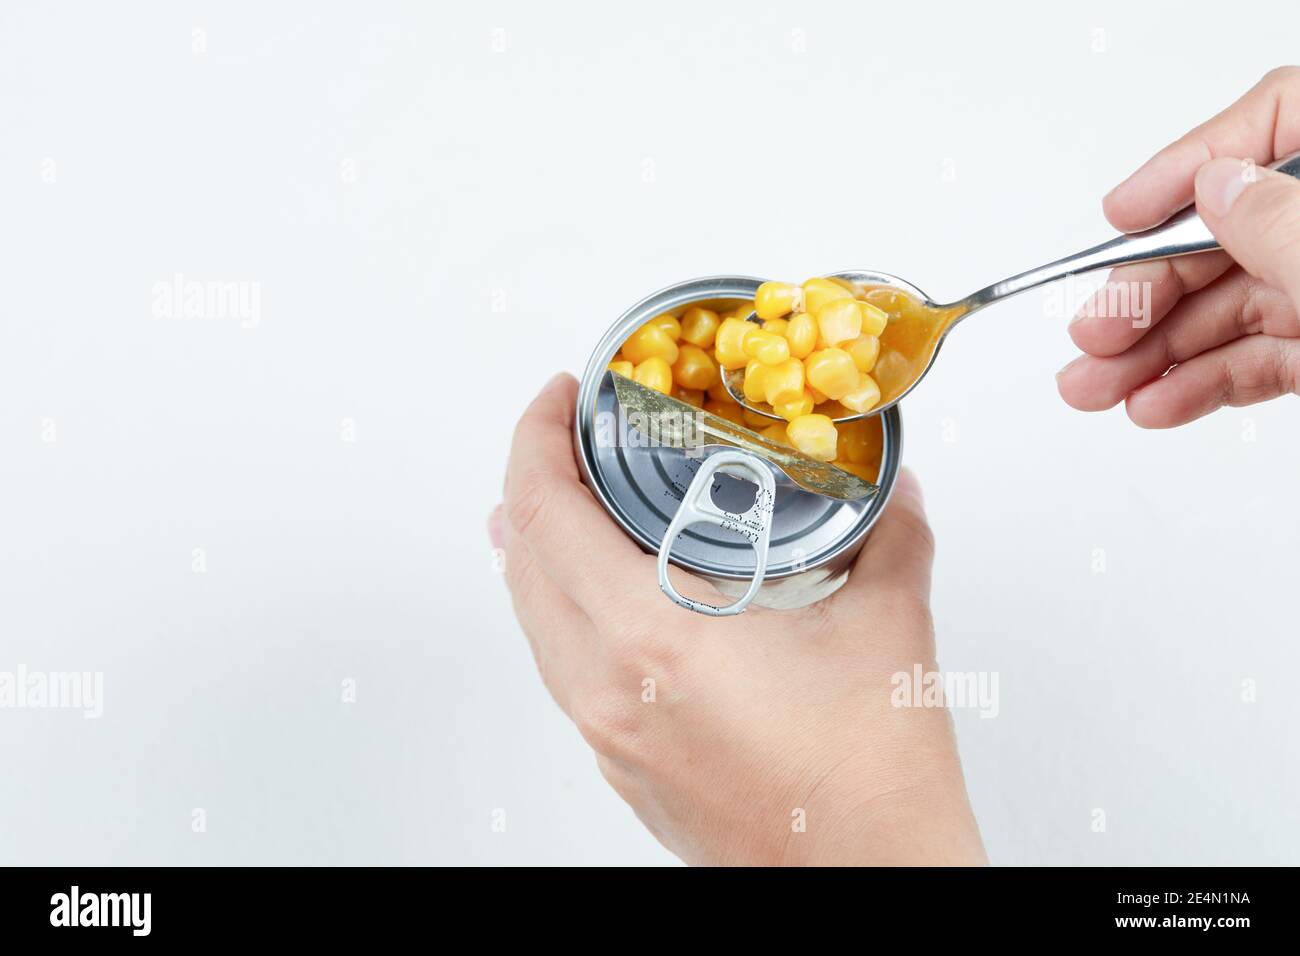 Hand taking a spoon of boiled sweet corn from a tin can on a white background Stock Photo